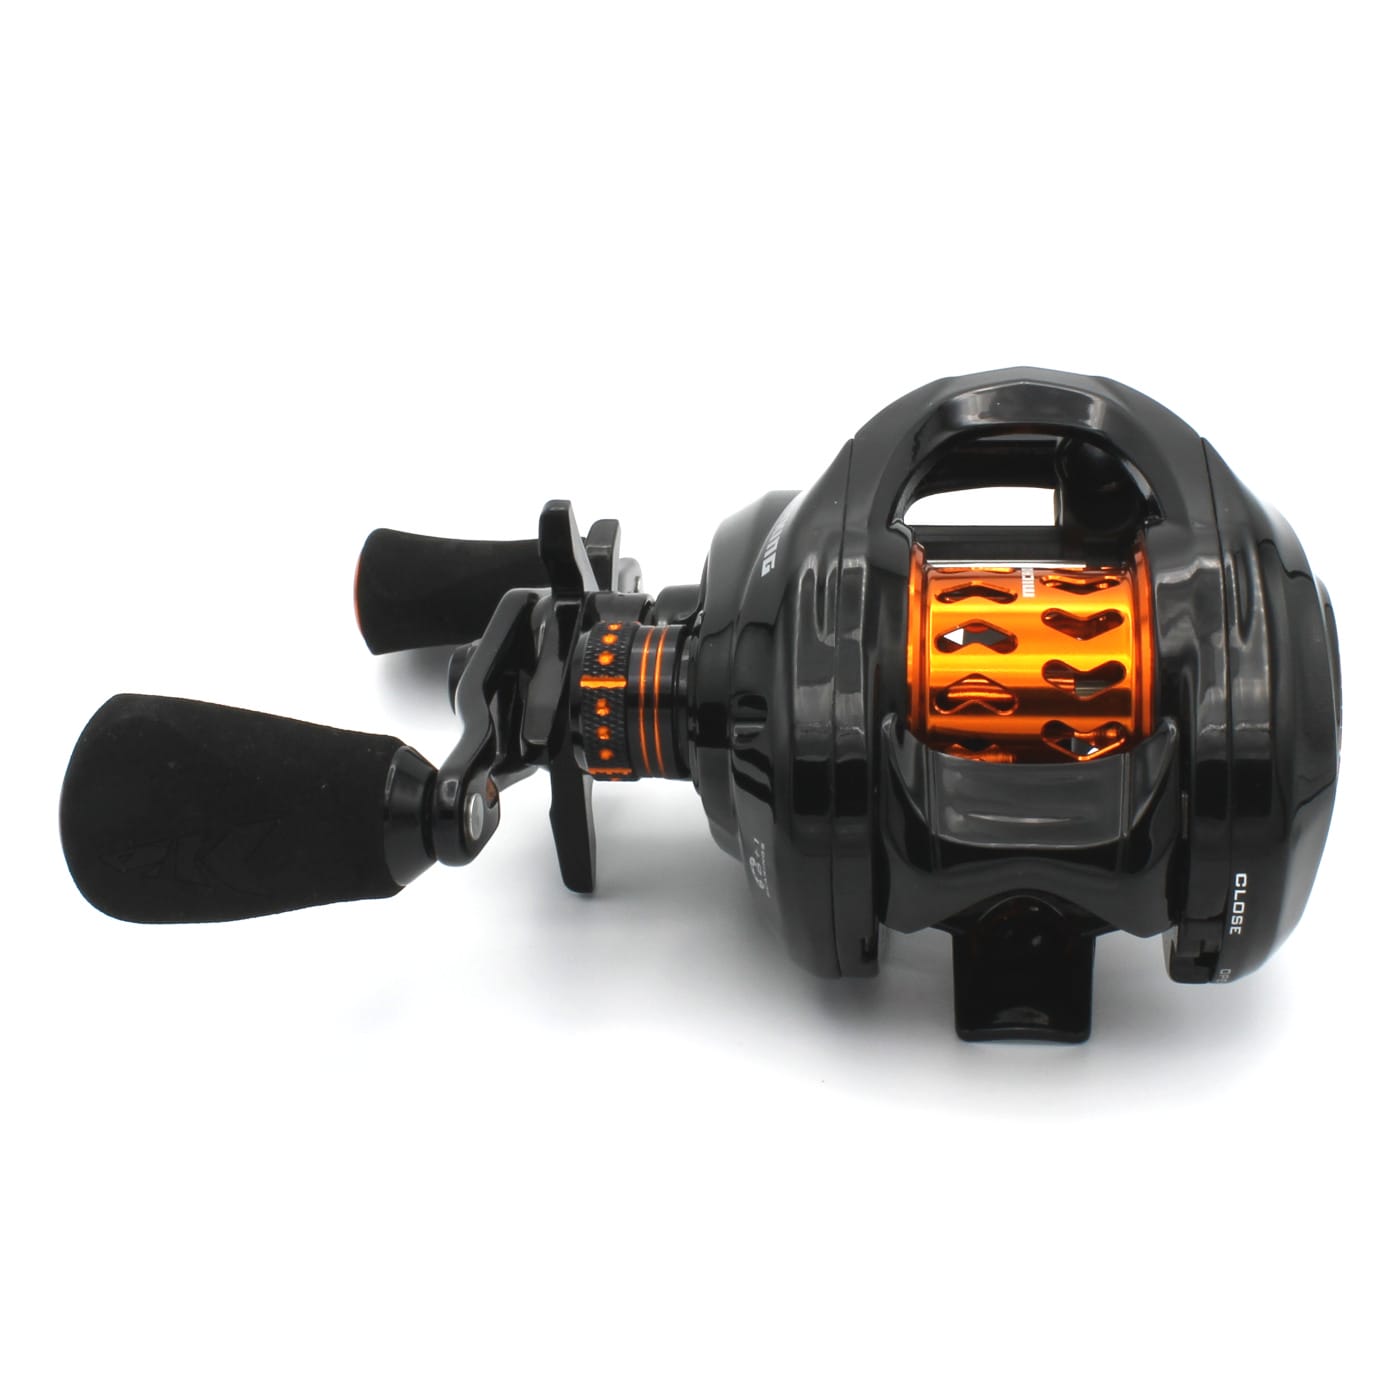 reelsonreels Featuring the new KastKing Zephyr BFS • • • Do you